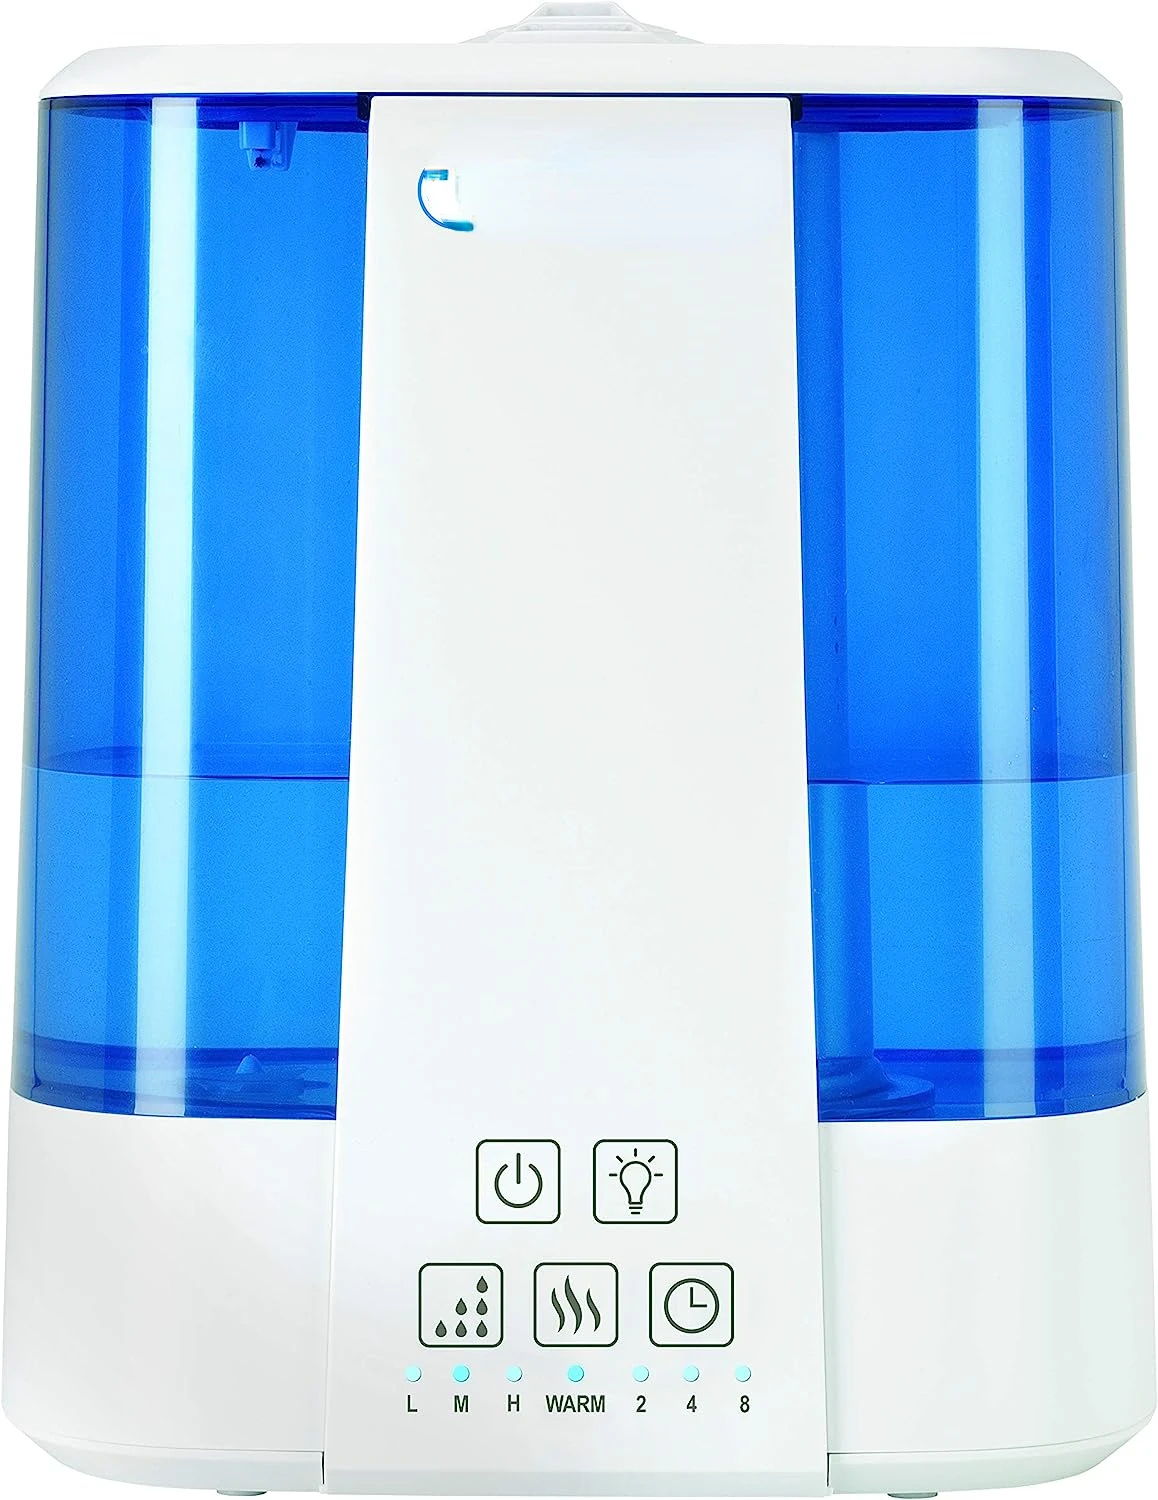 

Ultrasonic Warm & Cool Mist Humidifier, 100 Hrs. Run Time, 2 Gal. Tank, 560 Sq. Ft. Coverage, Quiet, Filter Free, Essential Dif